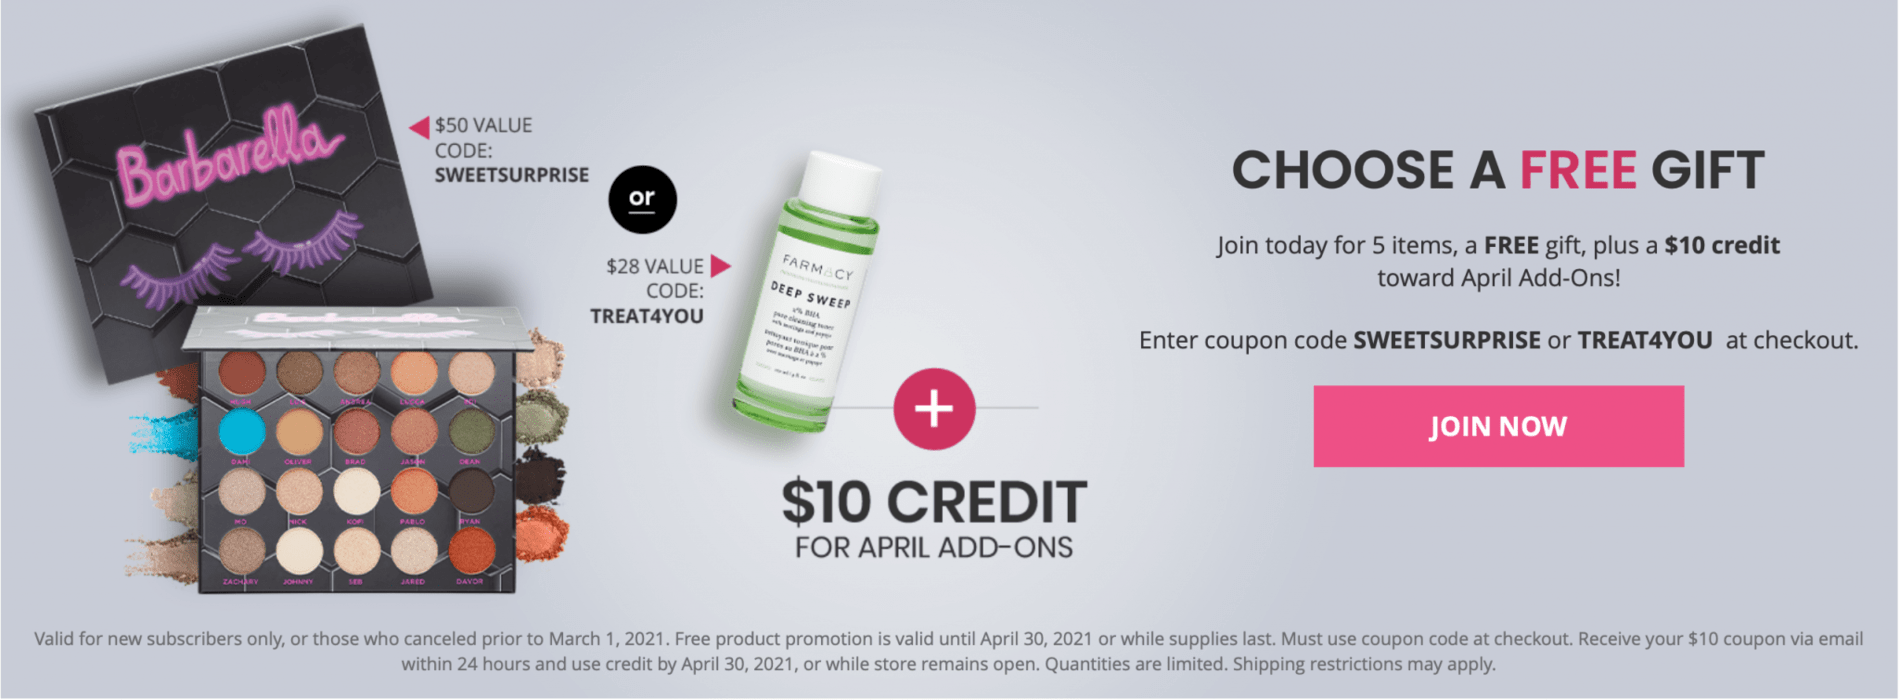 BOXYCHARM April 2021 Coupon Code – Free Gift with Purchase + $10 Pop-Up Credit!